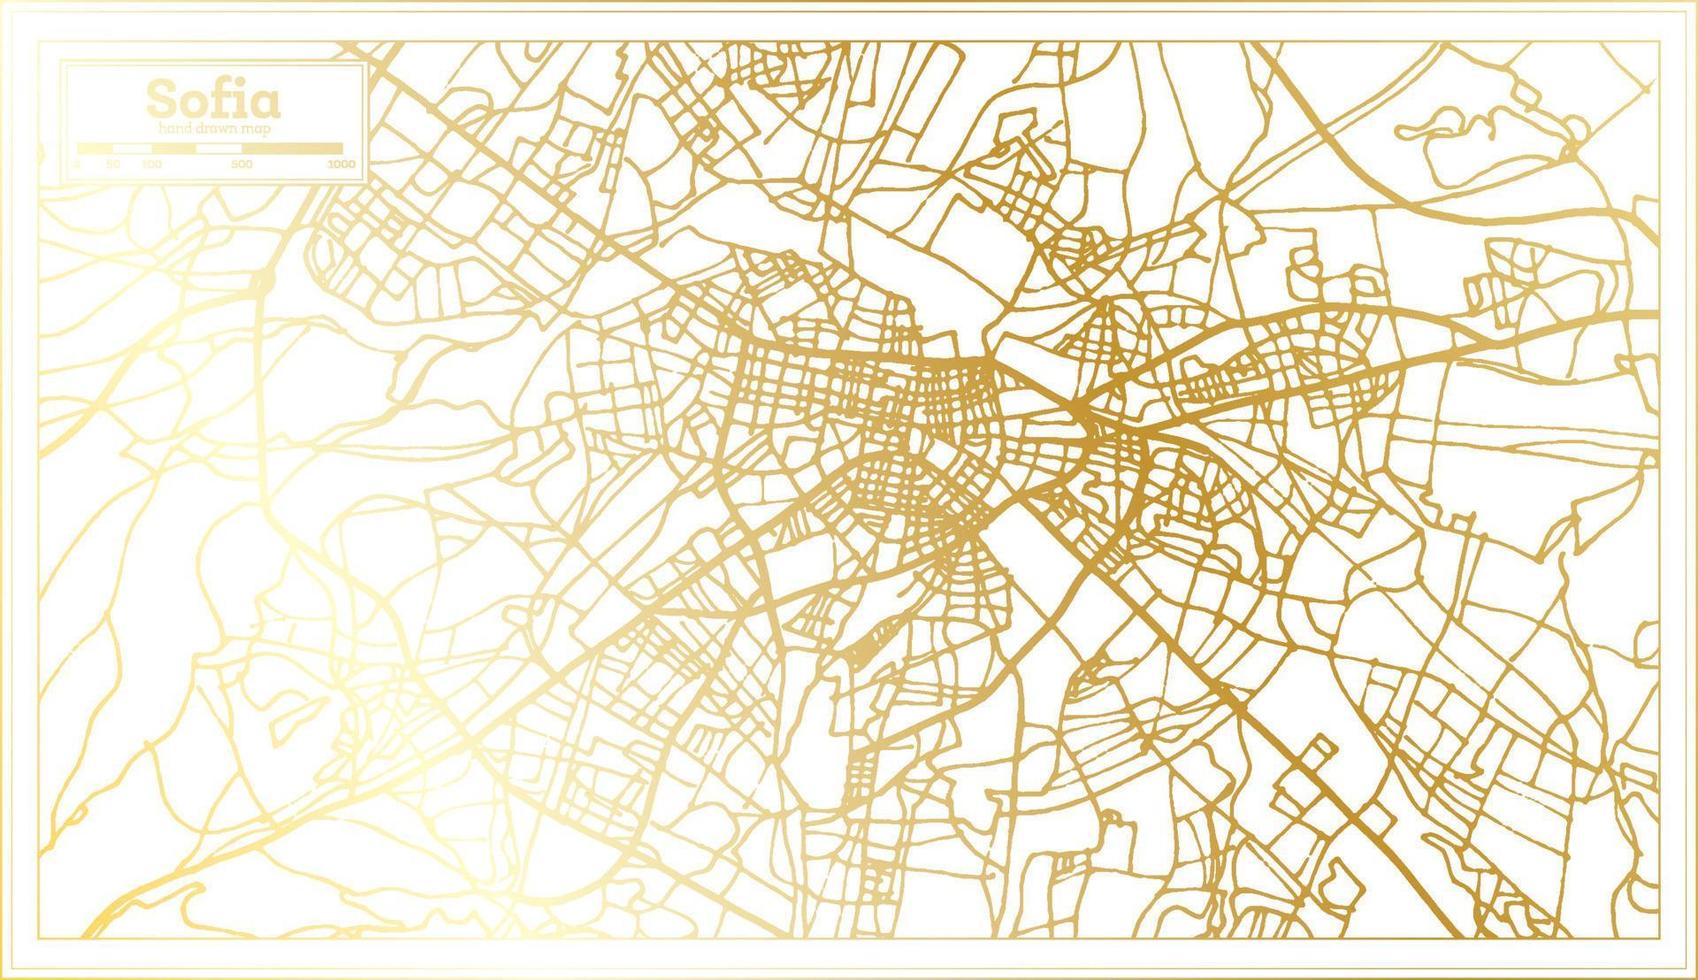 Sofia Bulgaria City Map in Retro Style in Golden Color. Outline Map. vector